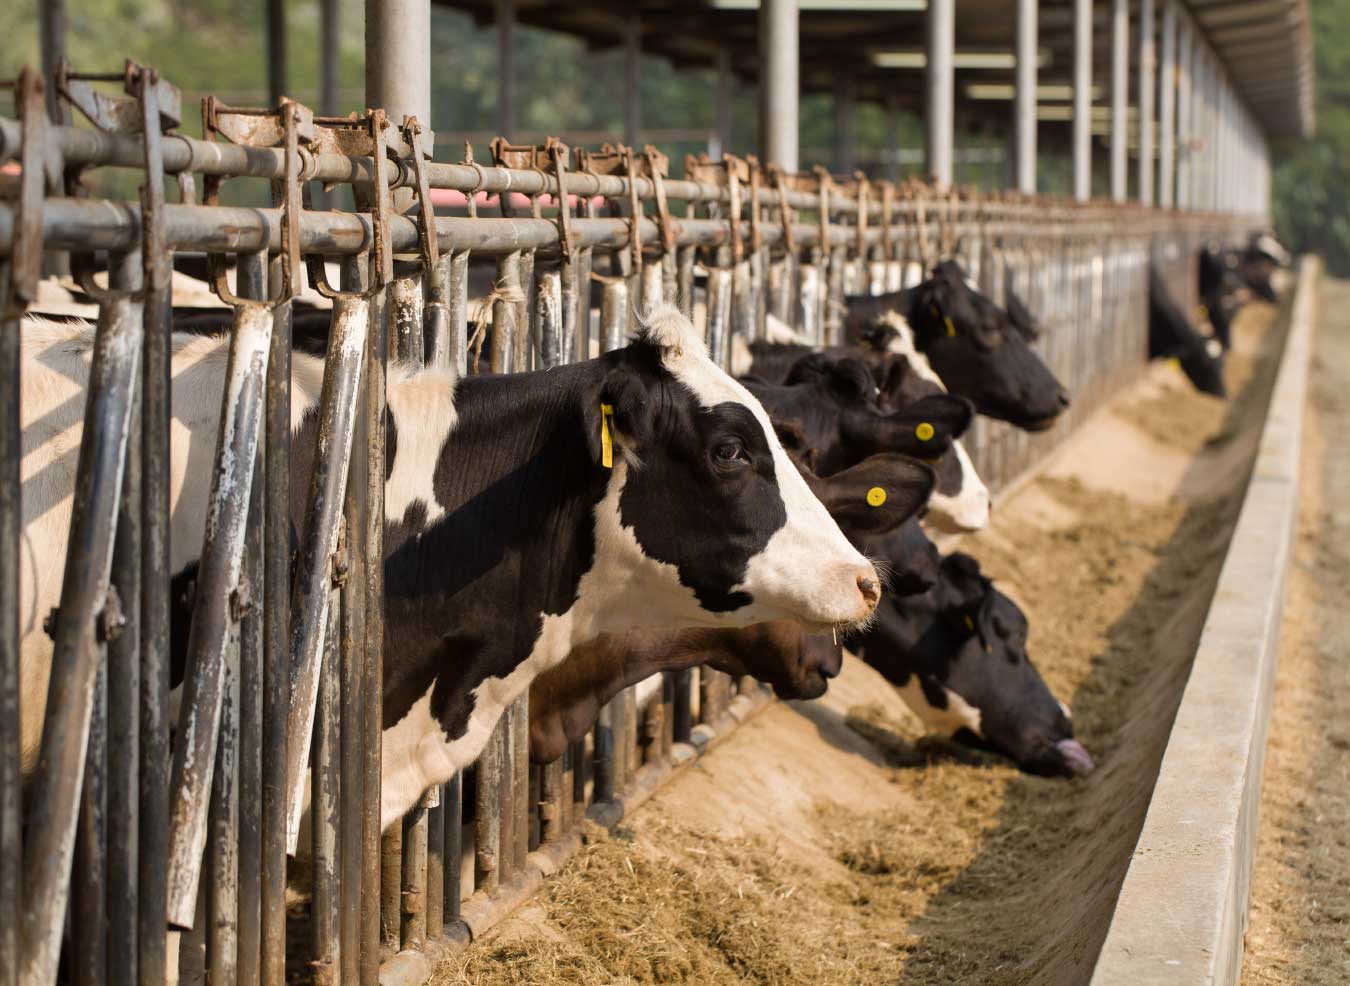 Effects of the selective feeding behavior in dairy cows